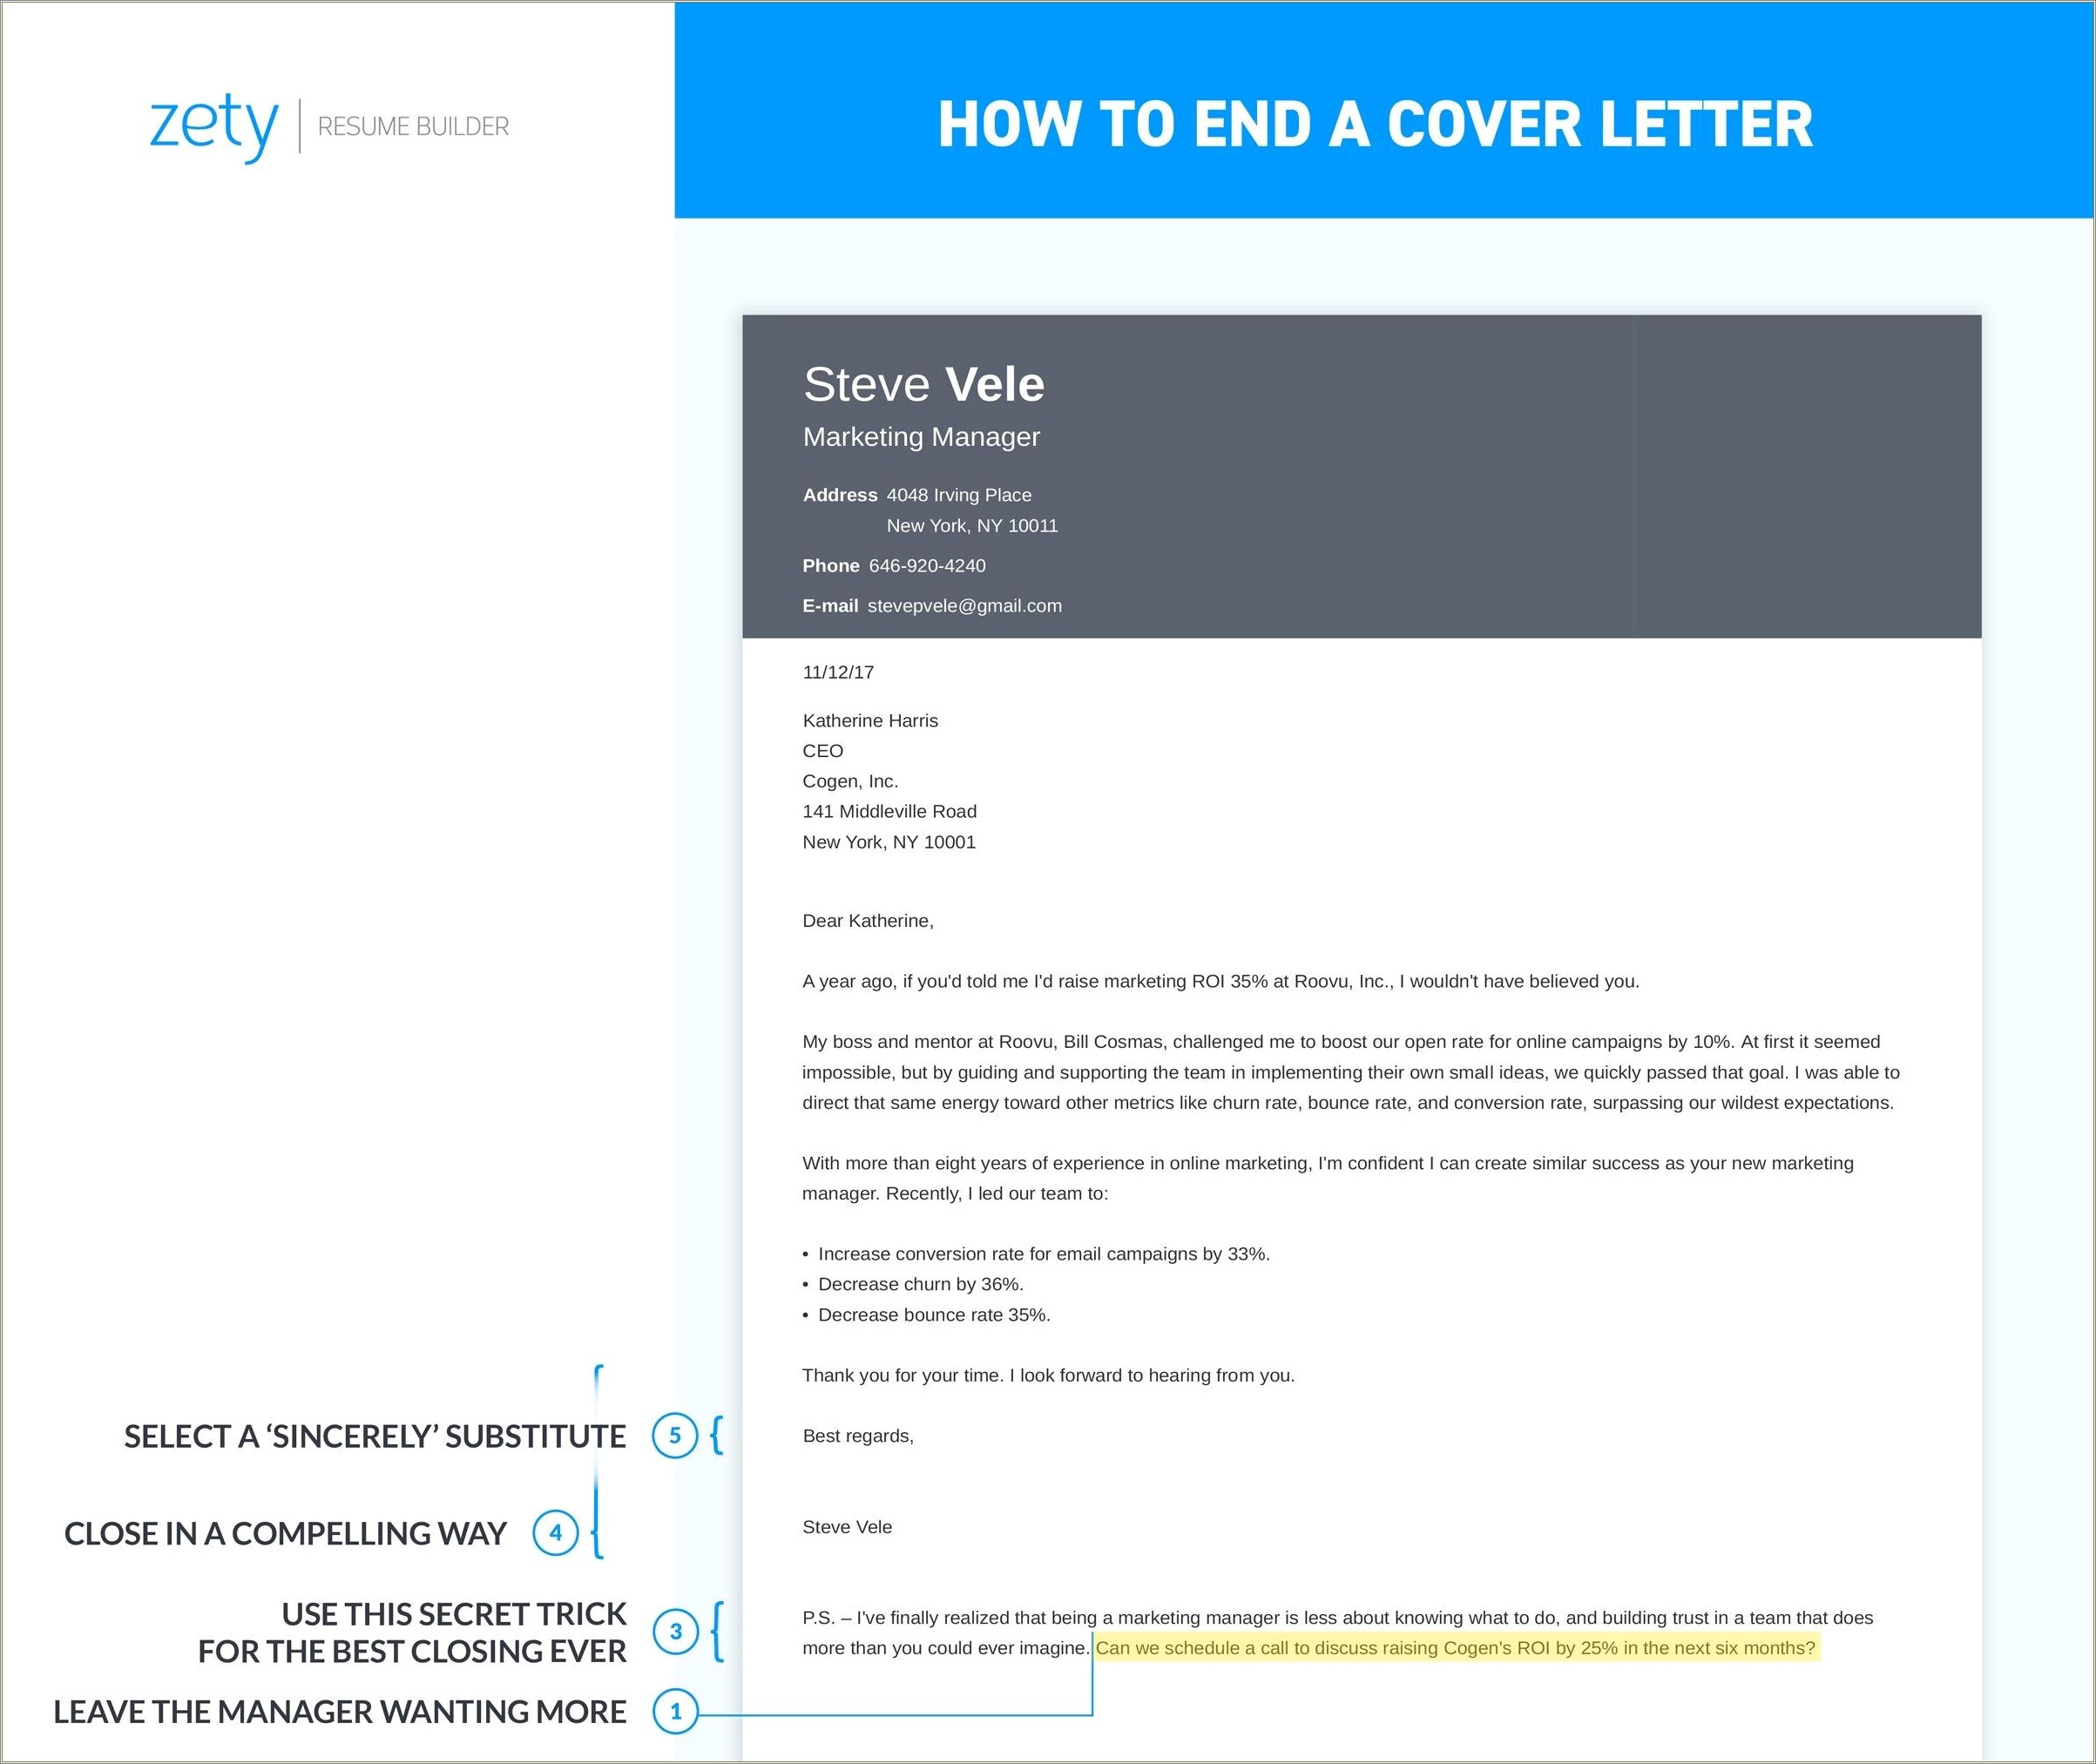 Emailing Your Resume And Cover Letter